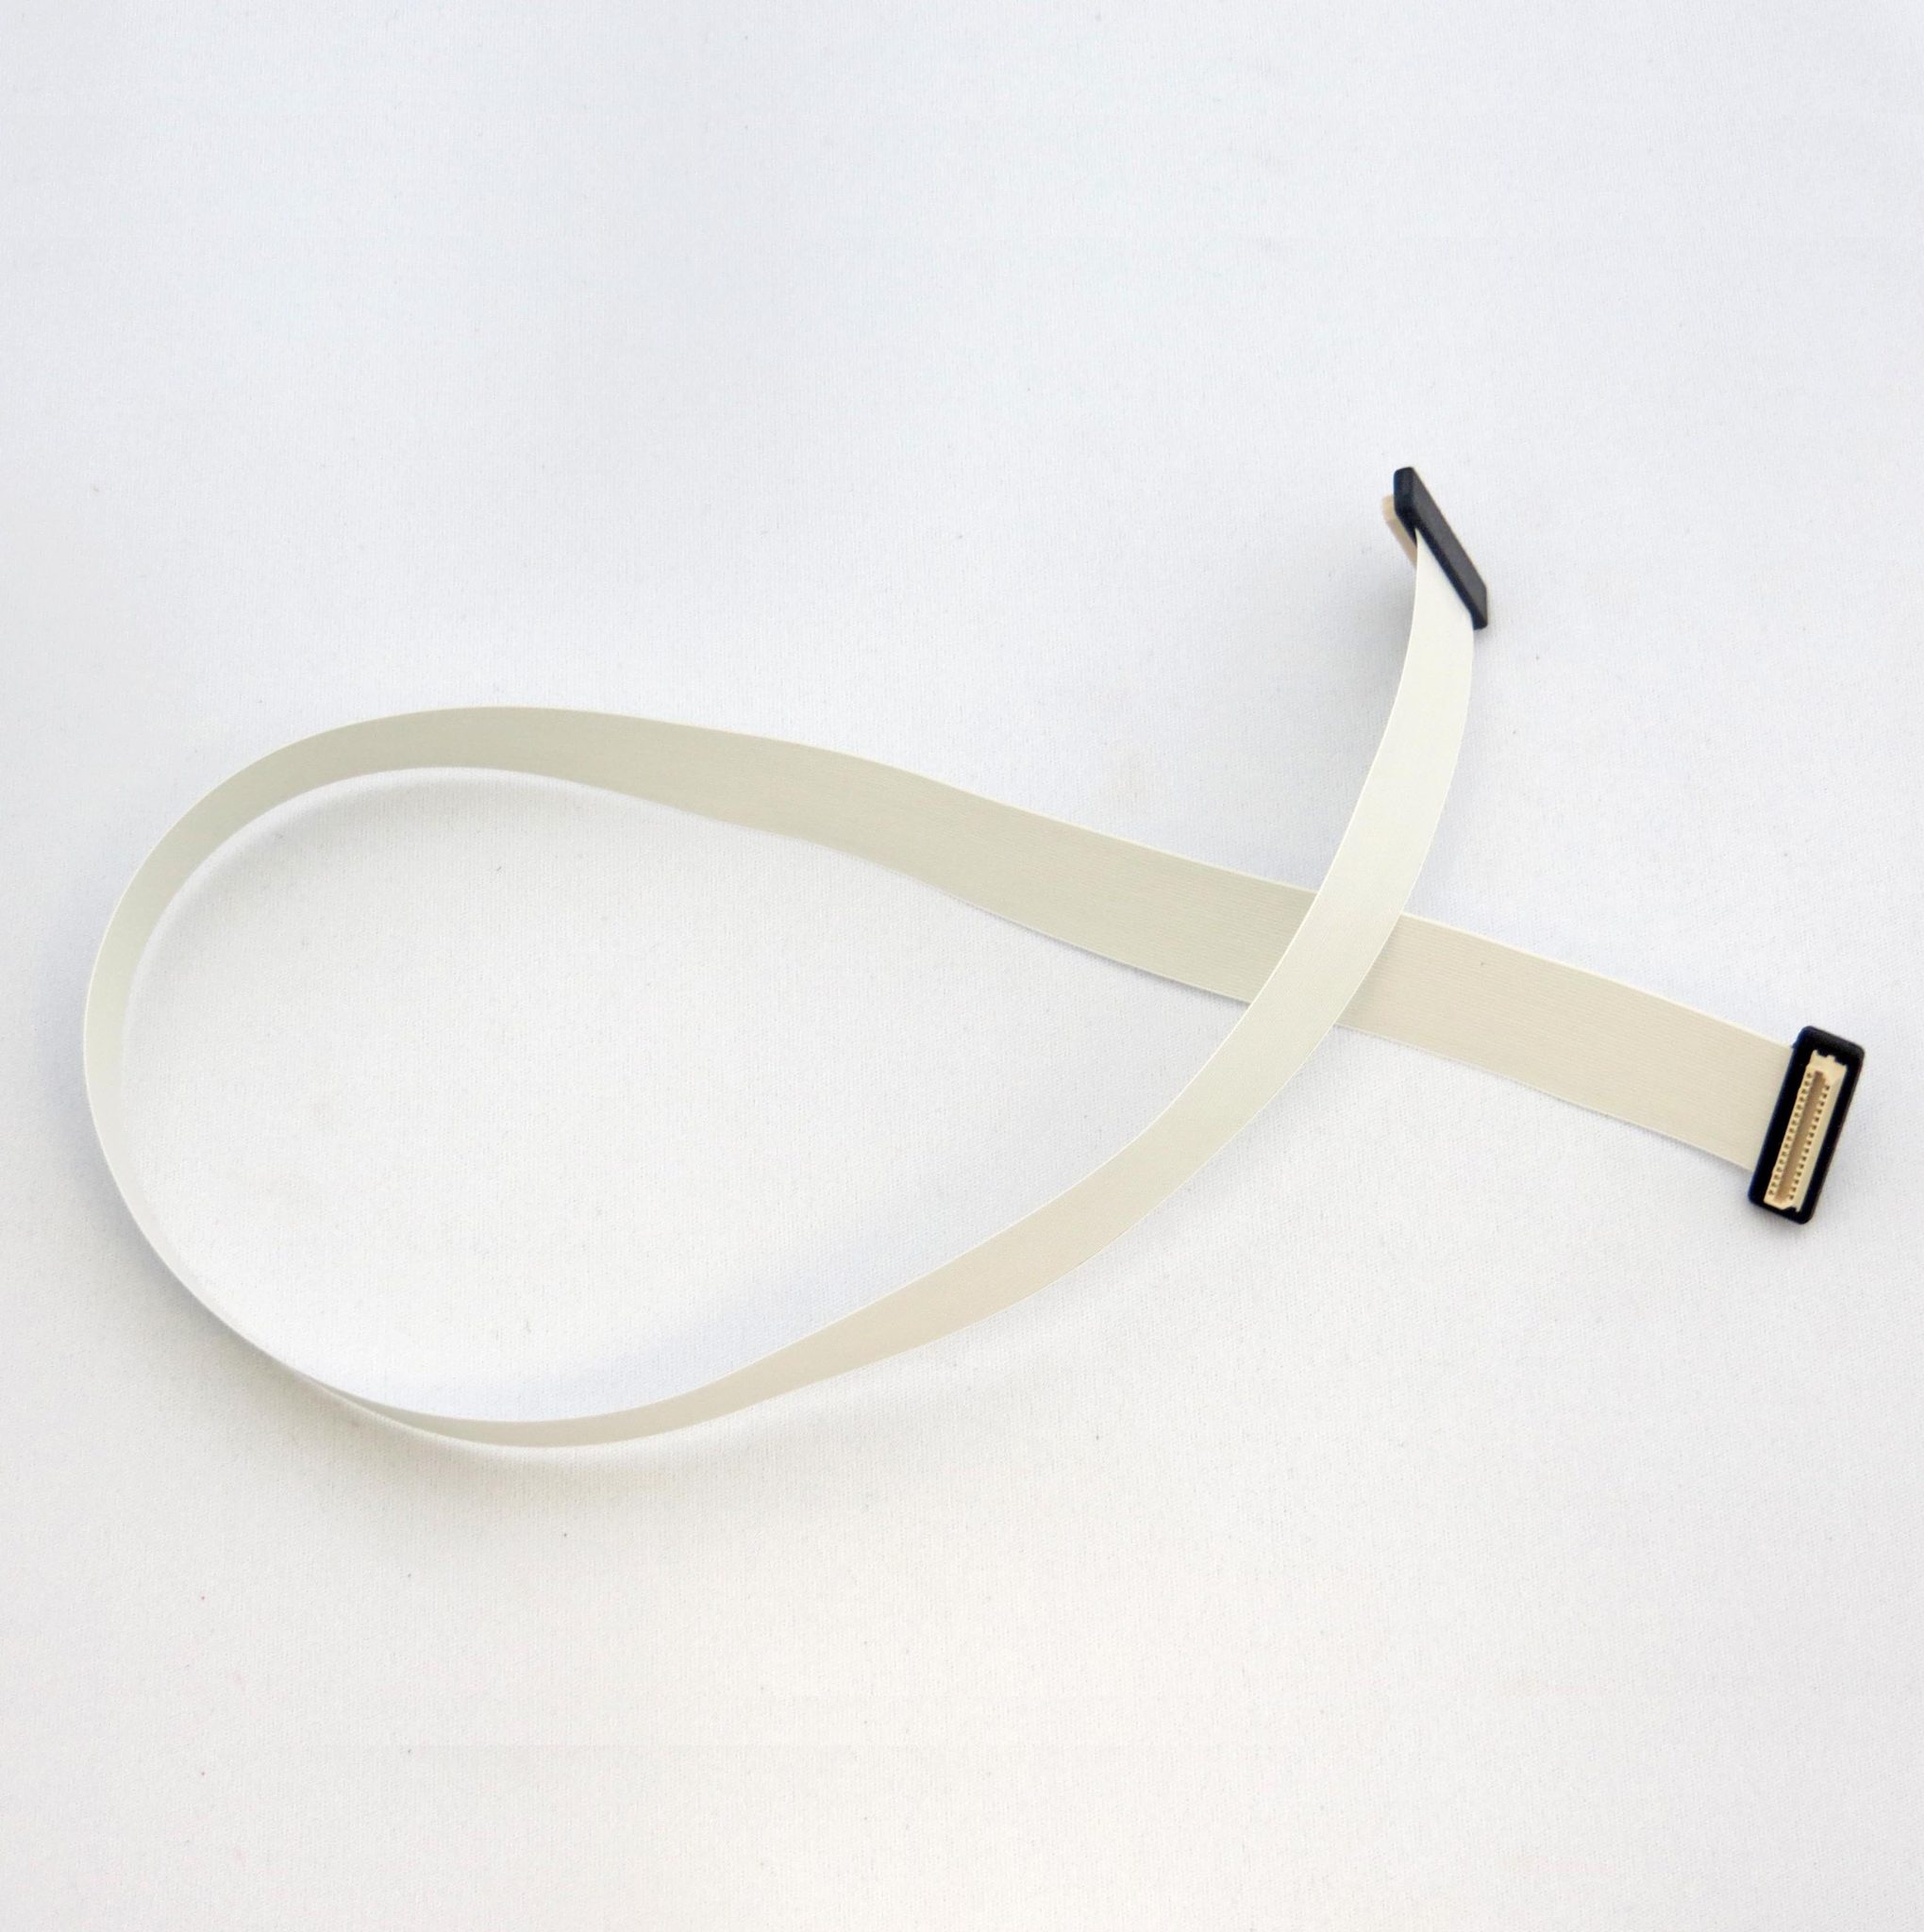 Digital LCD CABLE, 456mm, Female to Female 31-pin HiRose